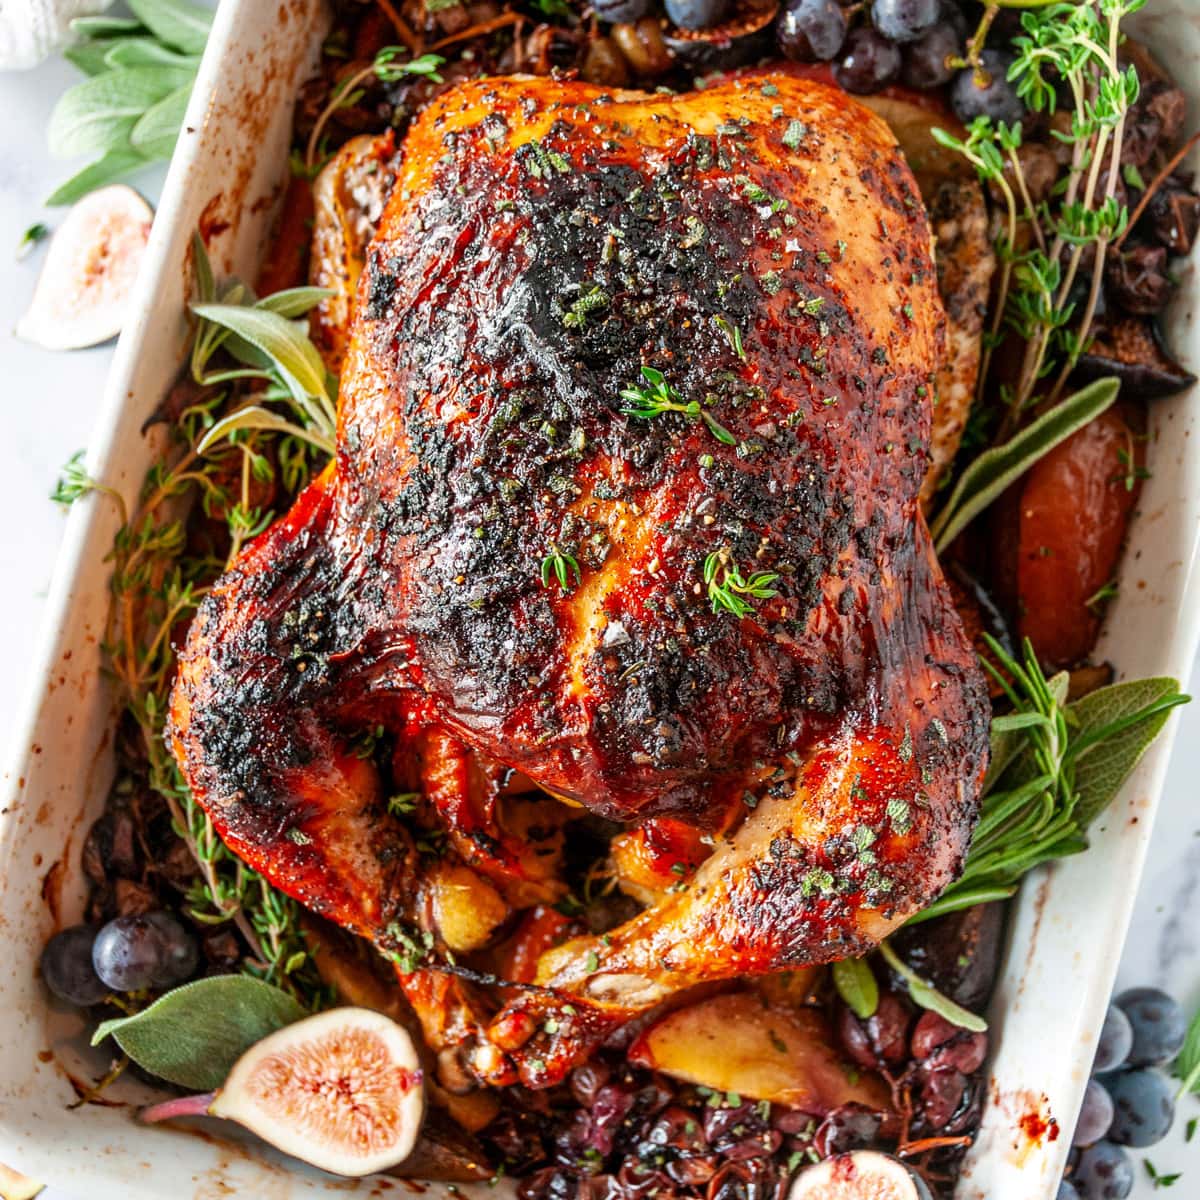 Autumn Apple Cider Roasted Chicken in white baking dish with figs, grapes, and herbs on white marble